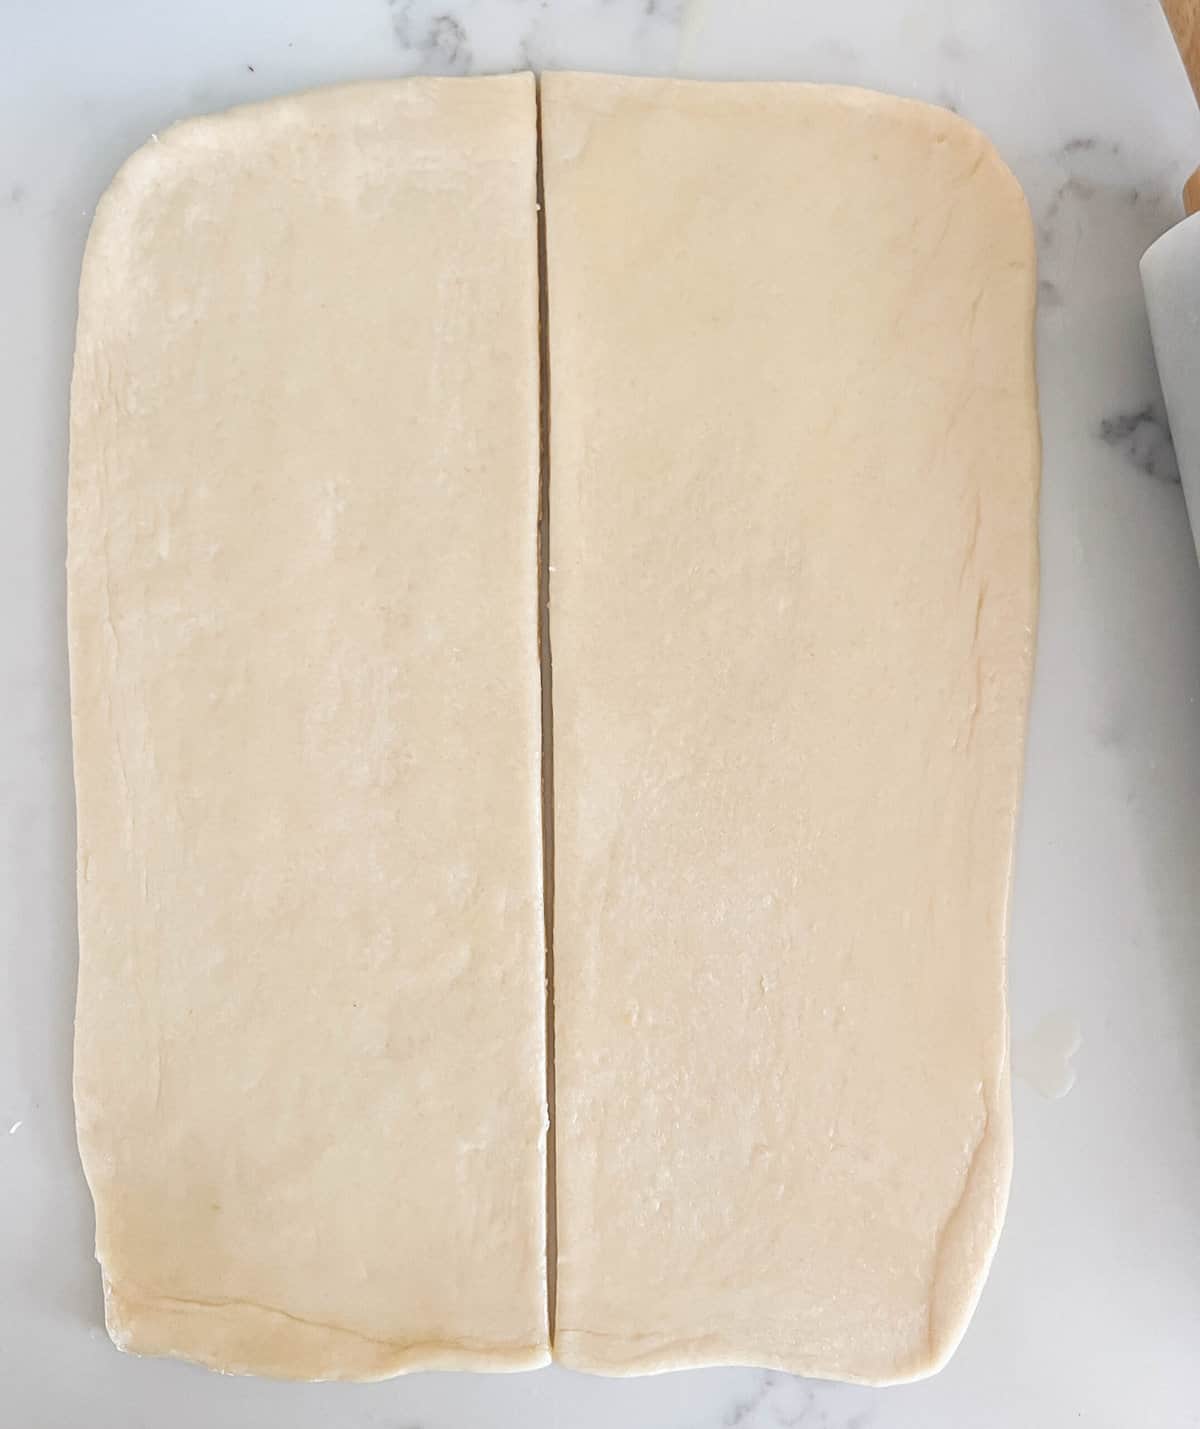 Parker House Dough Ball into rectangle and cutting in half. How to make homemade Parker House Rolls from scratch.